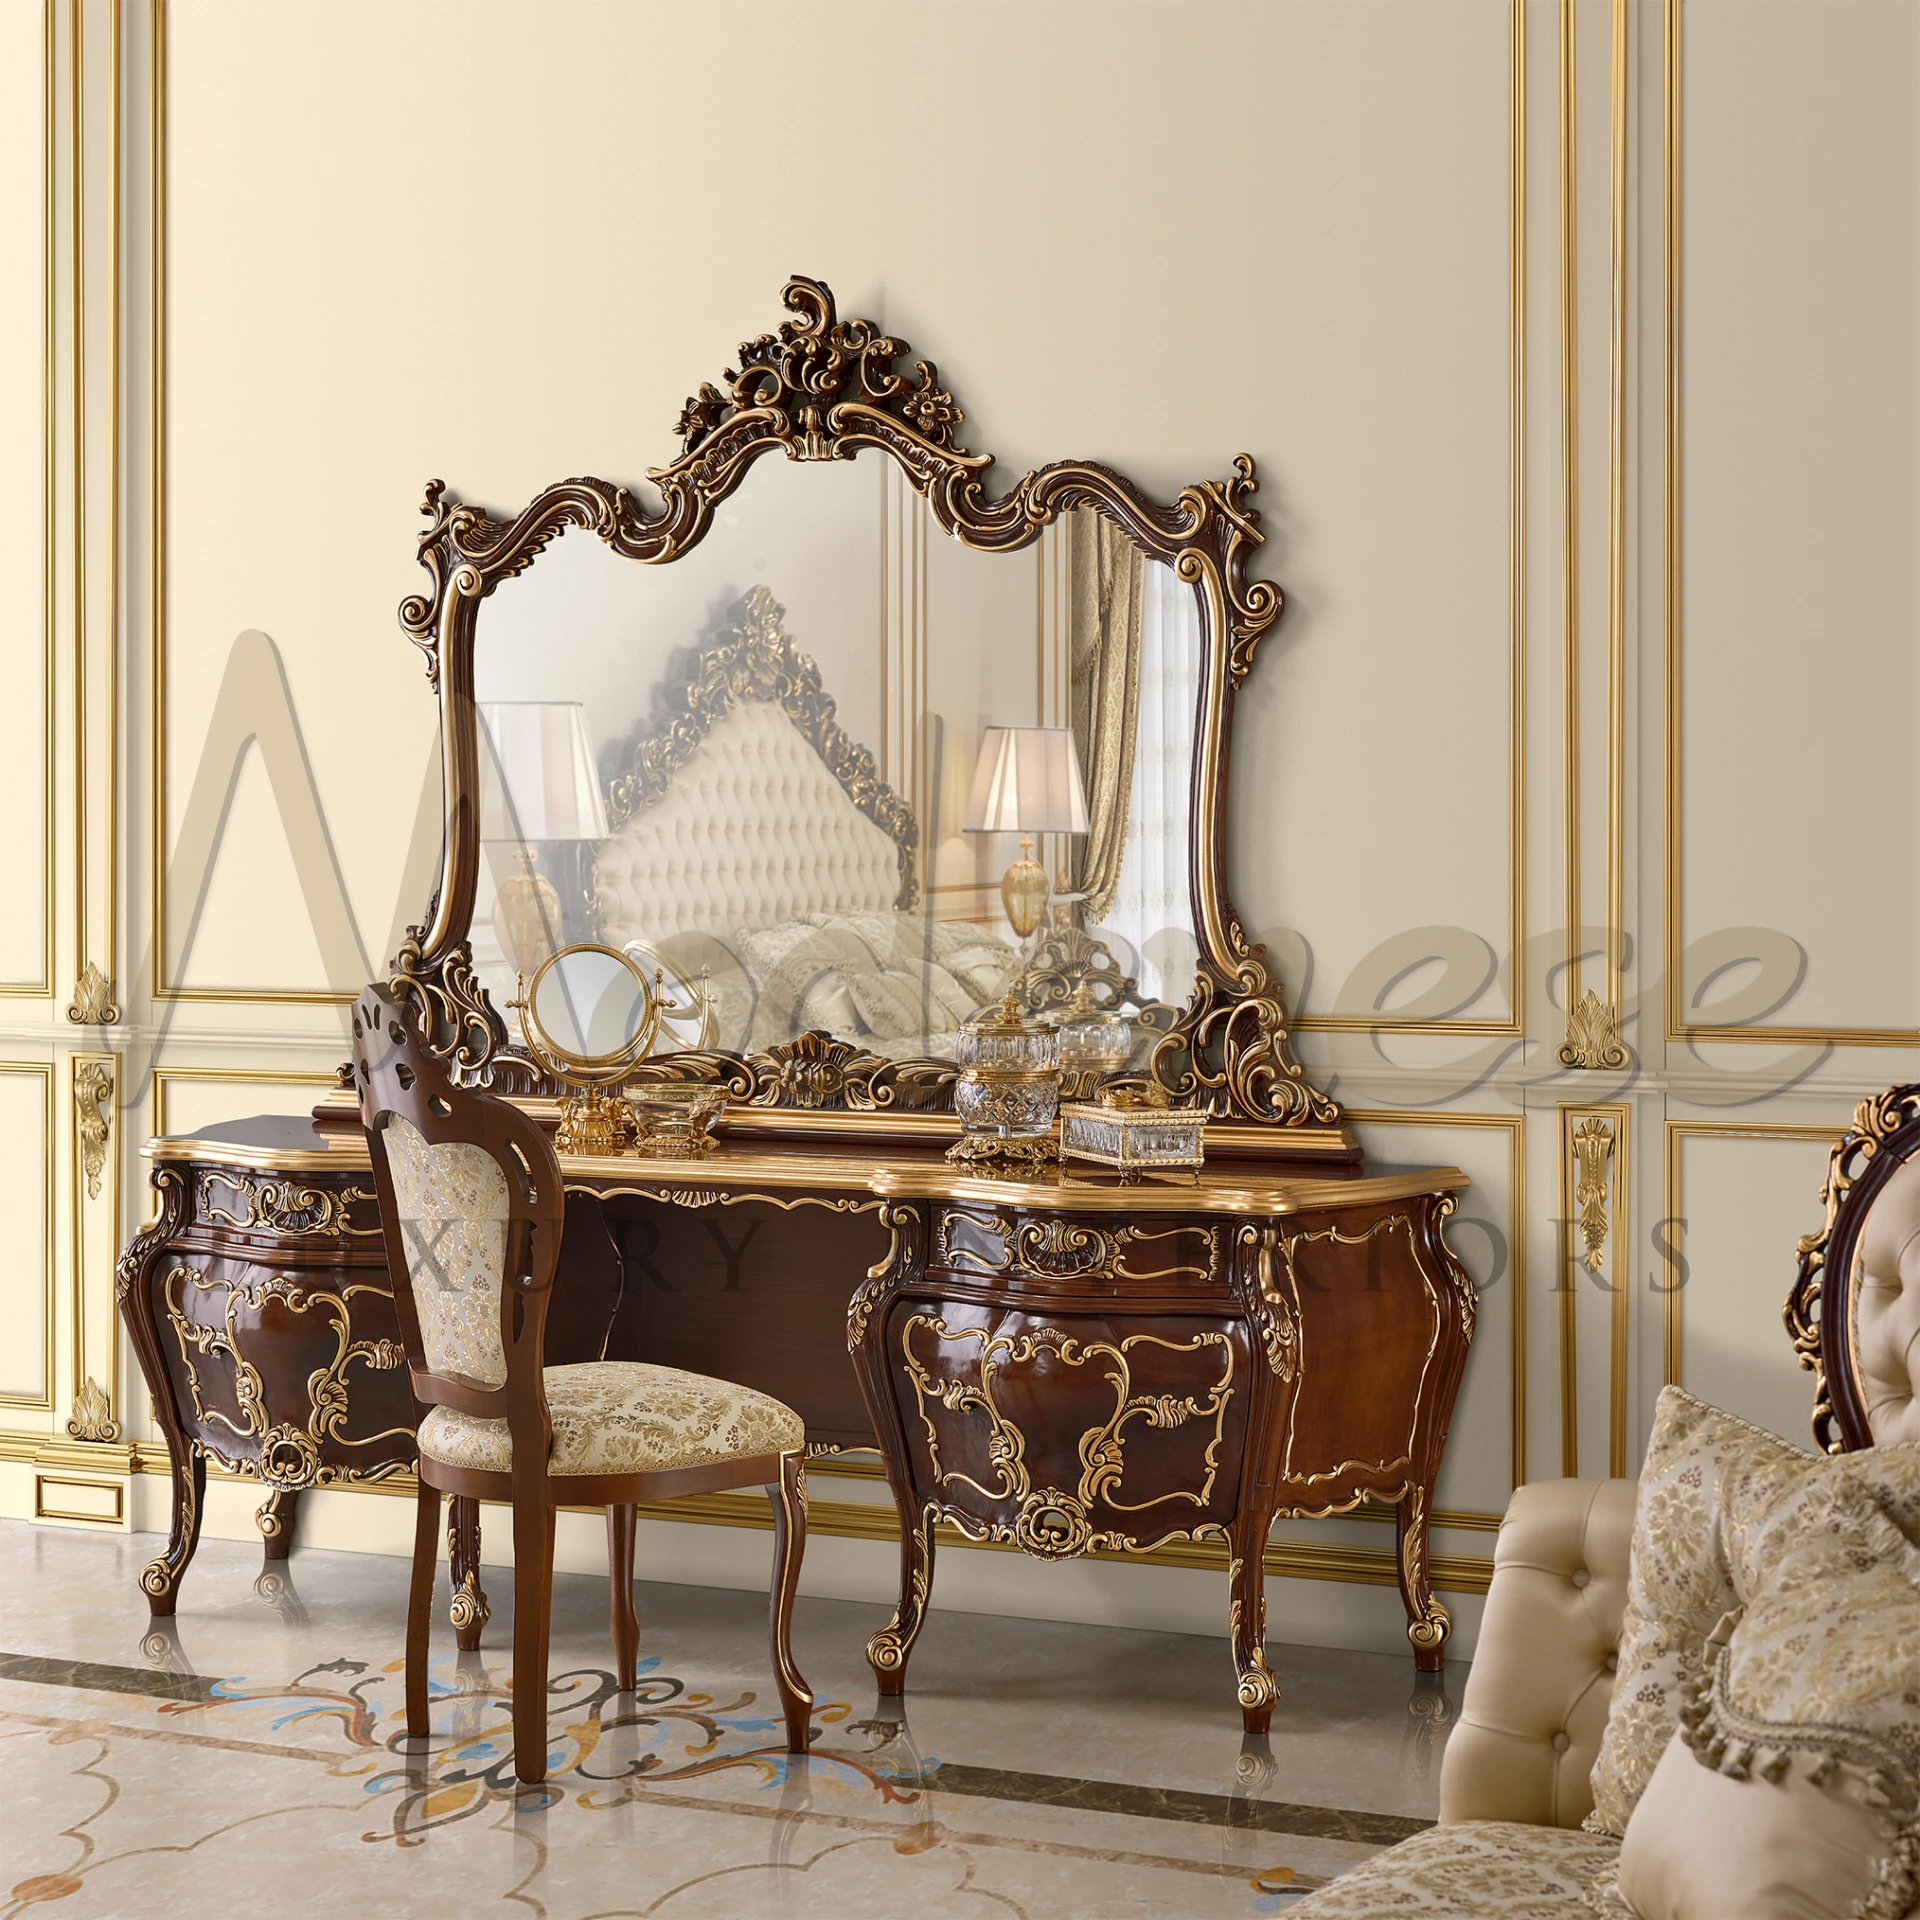 Handcrafted mirror with a wooden frame, embodying the timeless Empire style for sophisticated home settings.